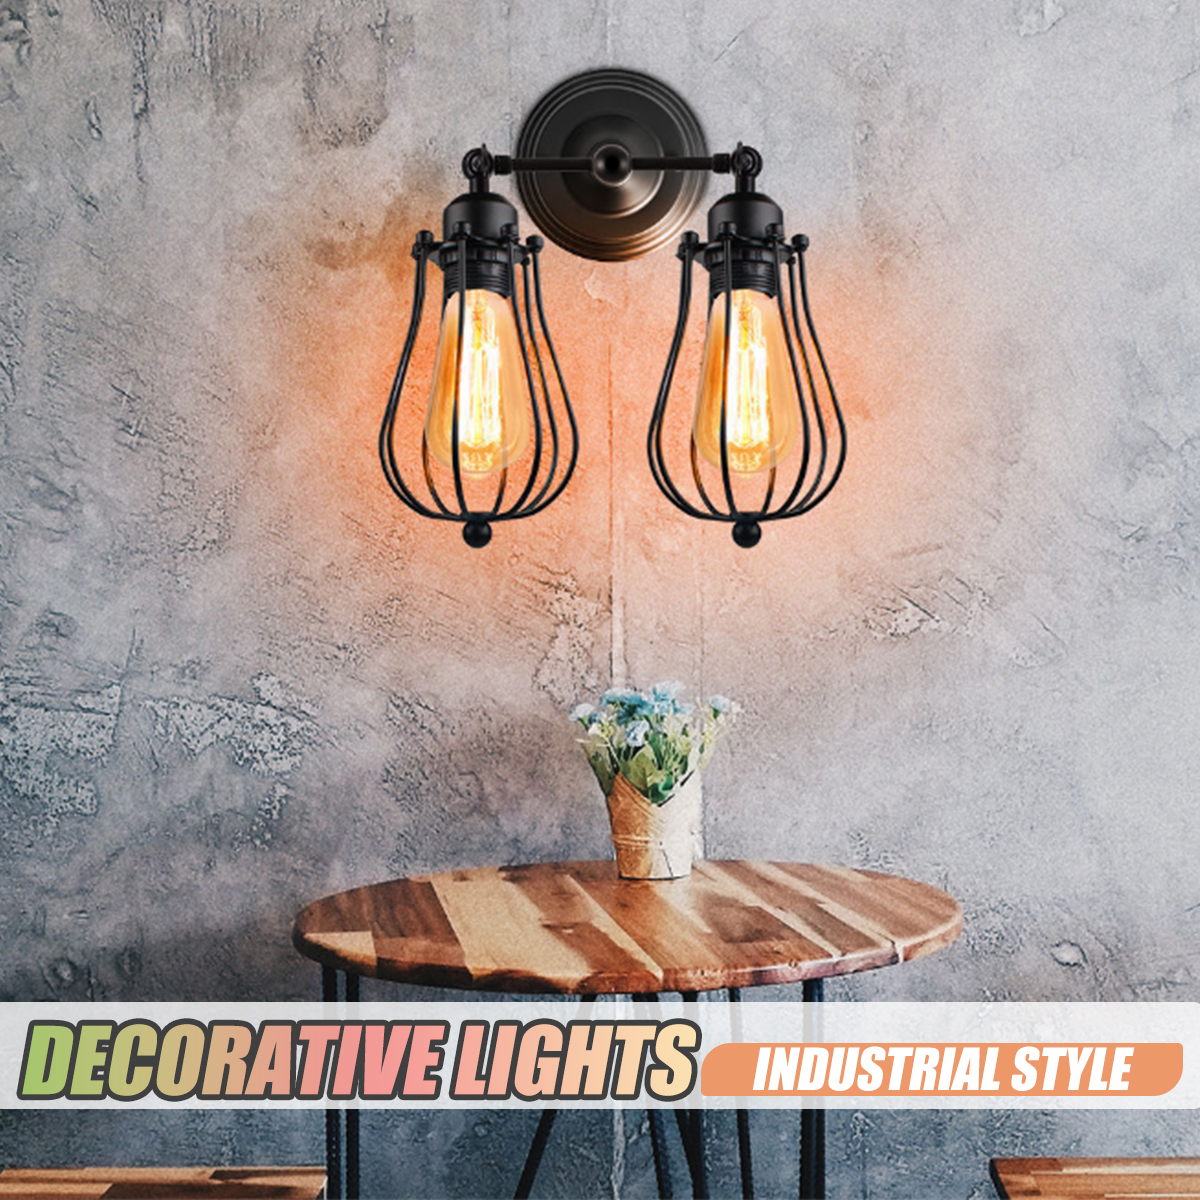 Vintage-Industrial-Wall-Light-Mounted-Sconce-Iron-Retro-Lamp-Fixture-Room-Decor-1682933-2